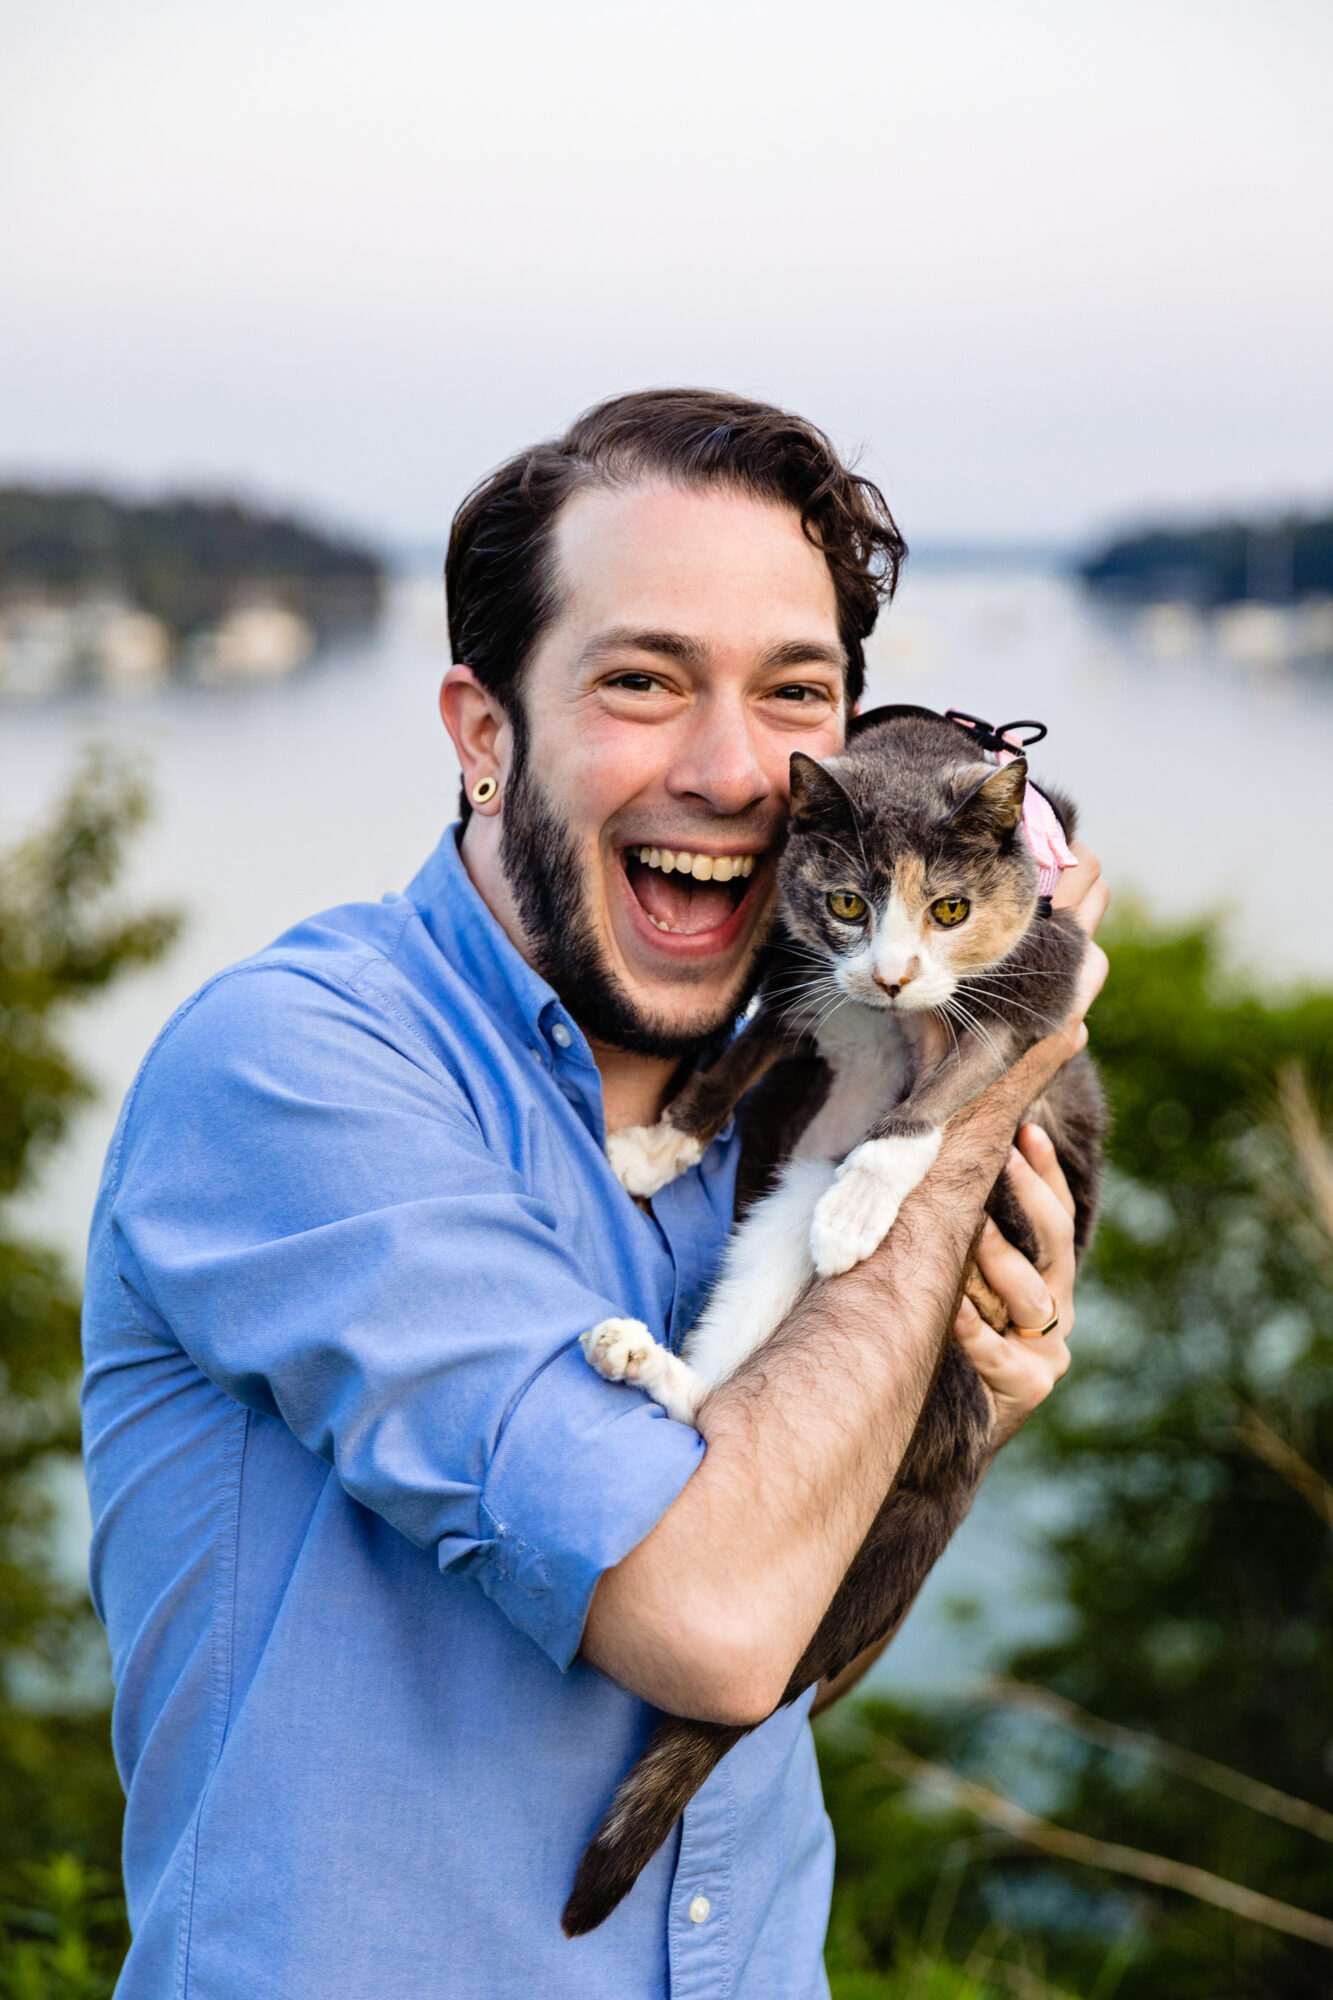 A photo of a man holding a cat in Northeast Harbor, Maine